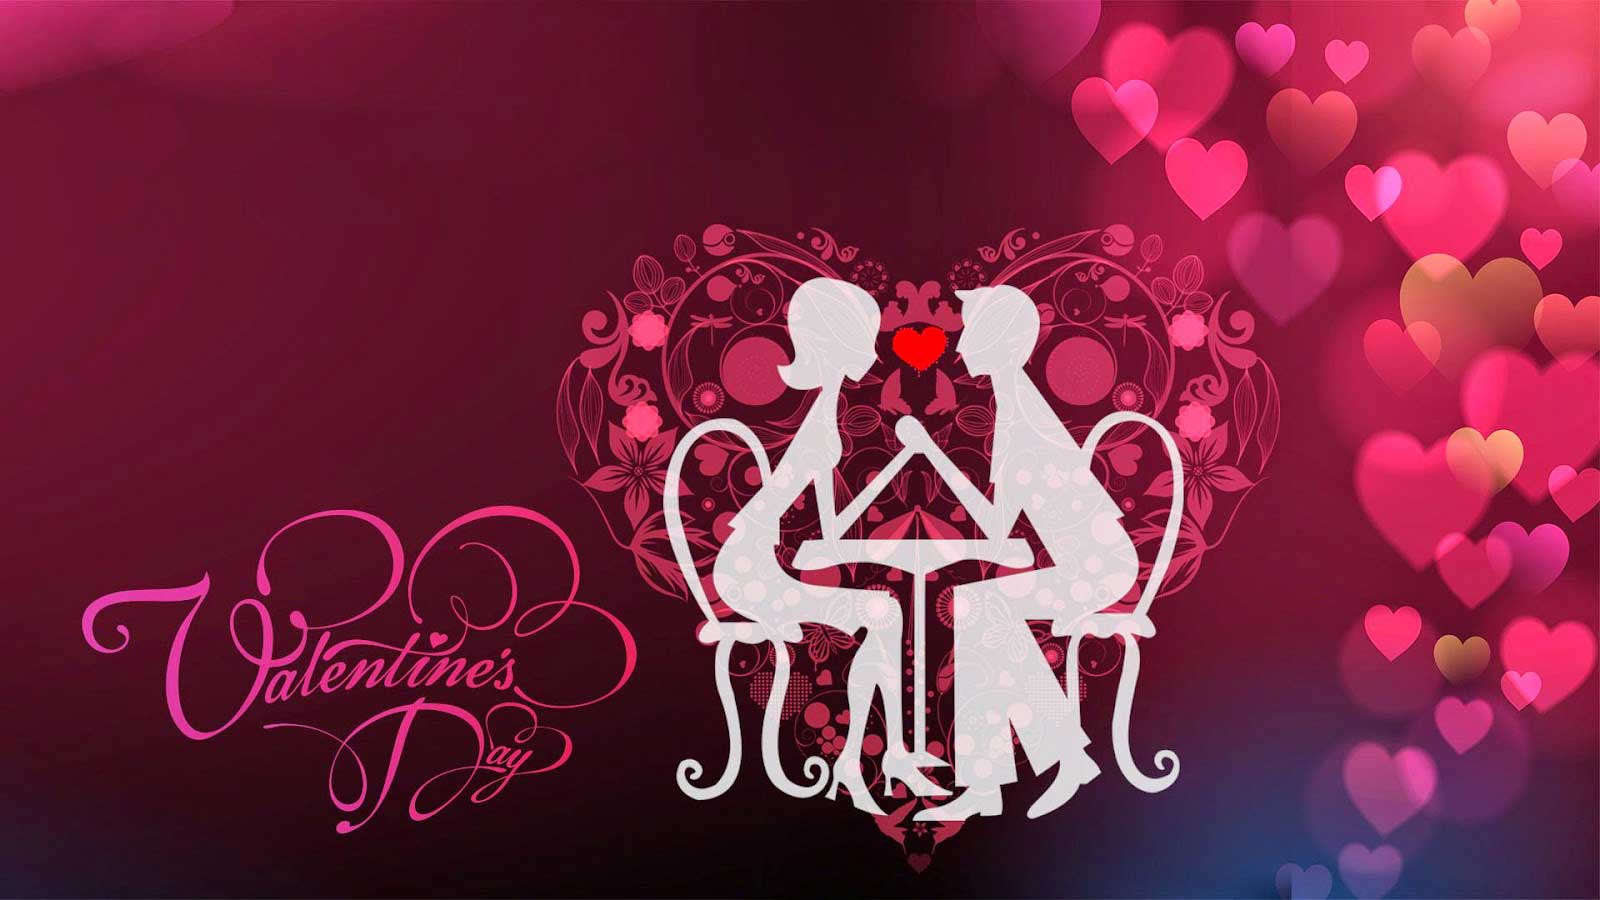 Valentines Day Images 2016 couple